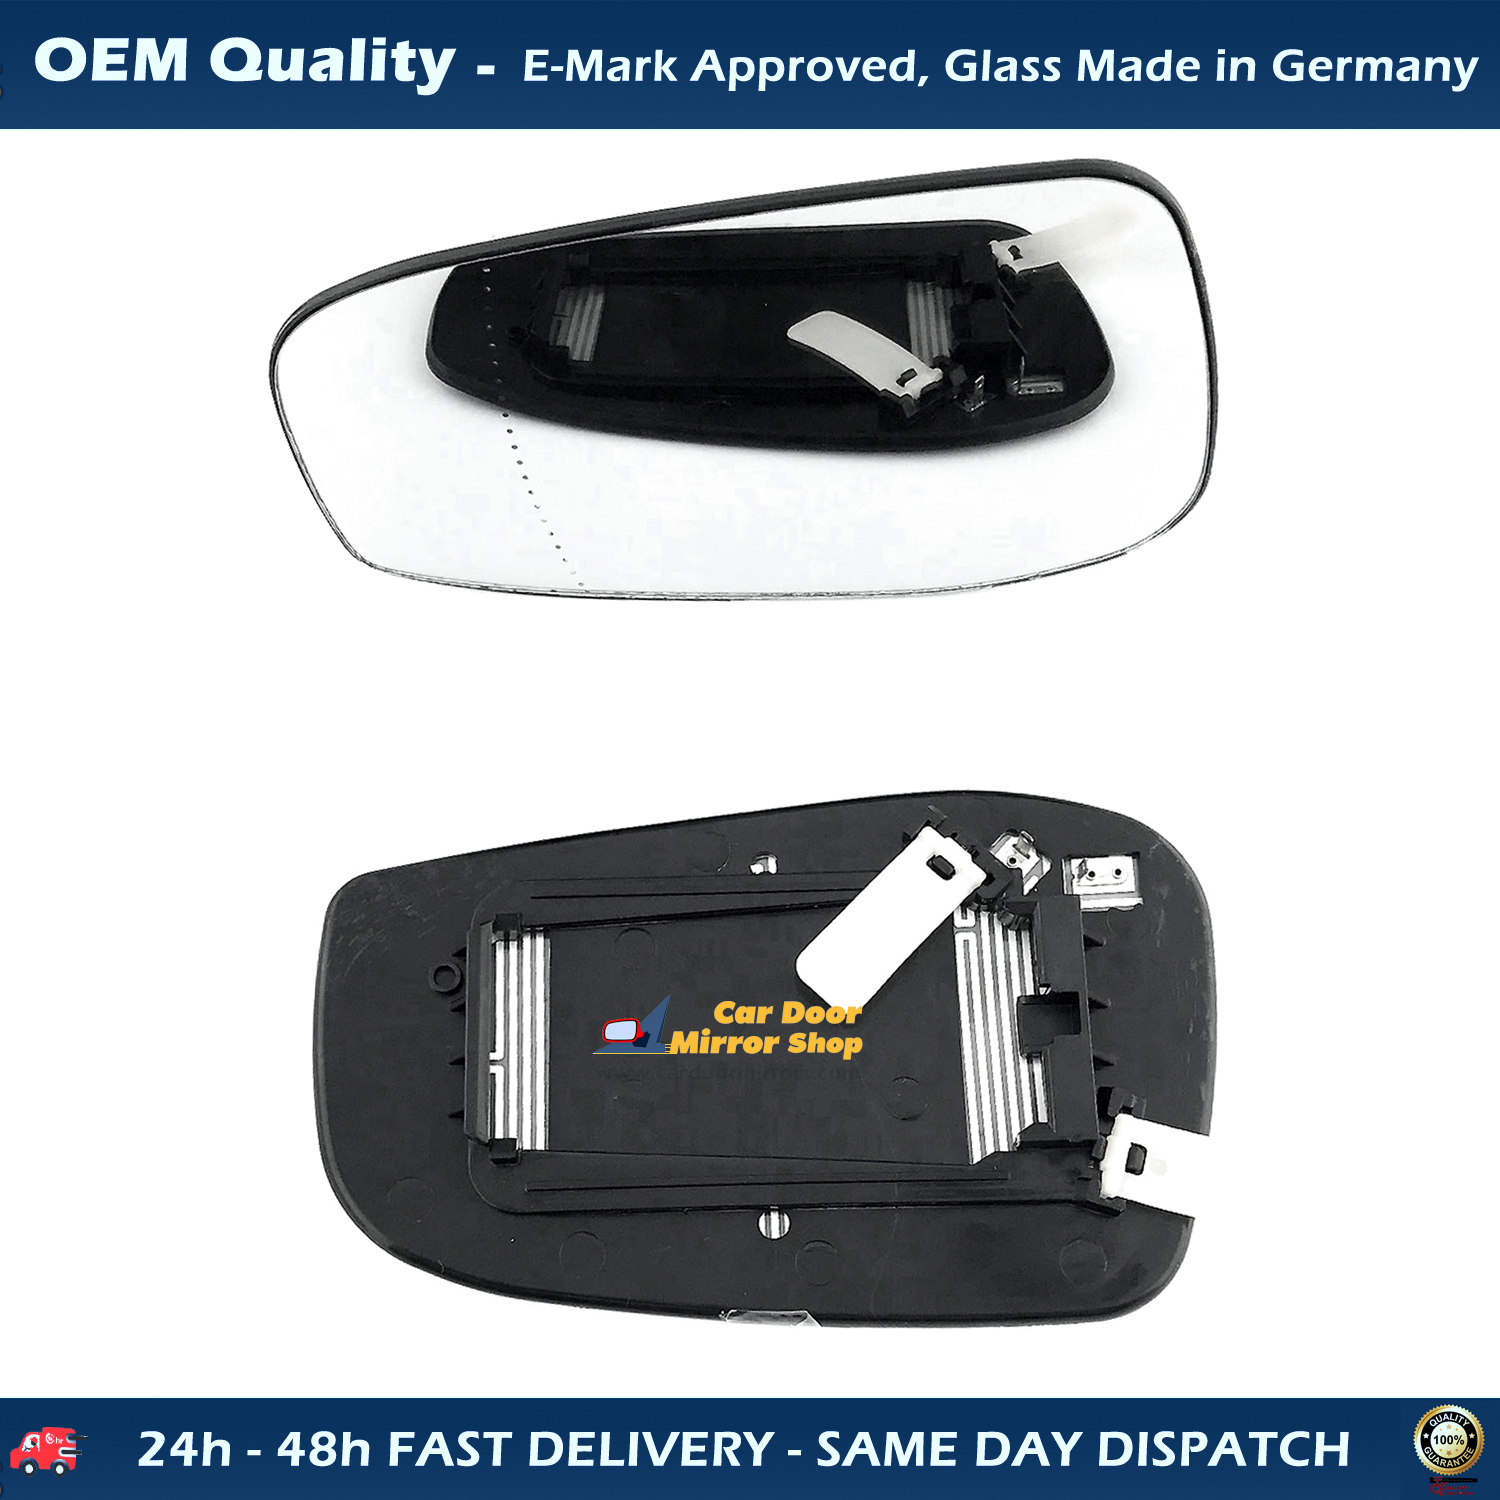 Volvo V70 Wing Mirror Glass With Base LEFT HAND ( UK Passenger Side ) 2000 to 2006 – Heated Base Convex Mirror